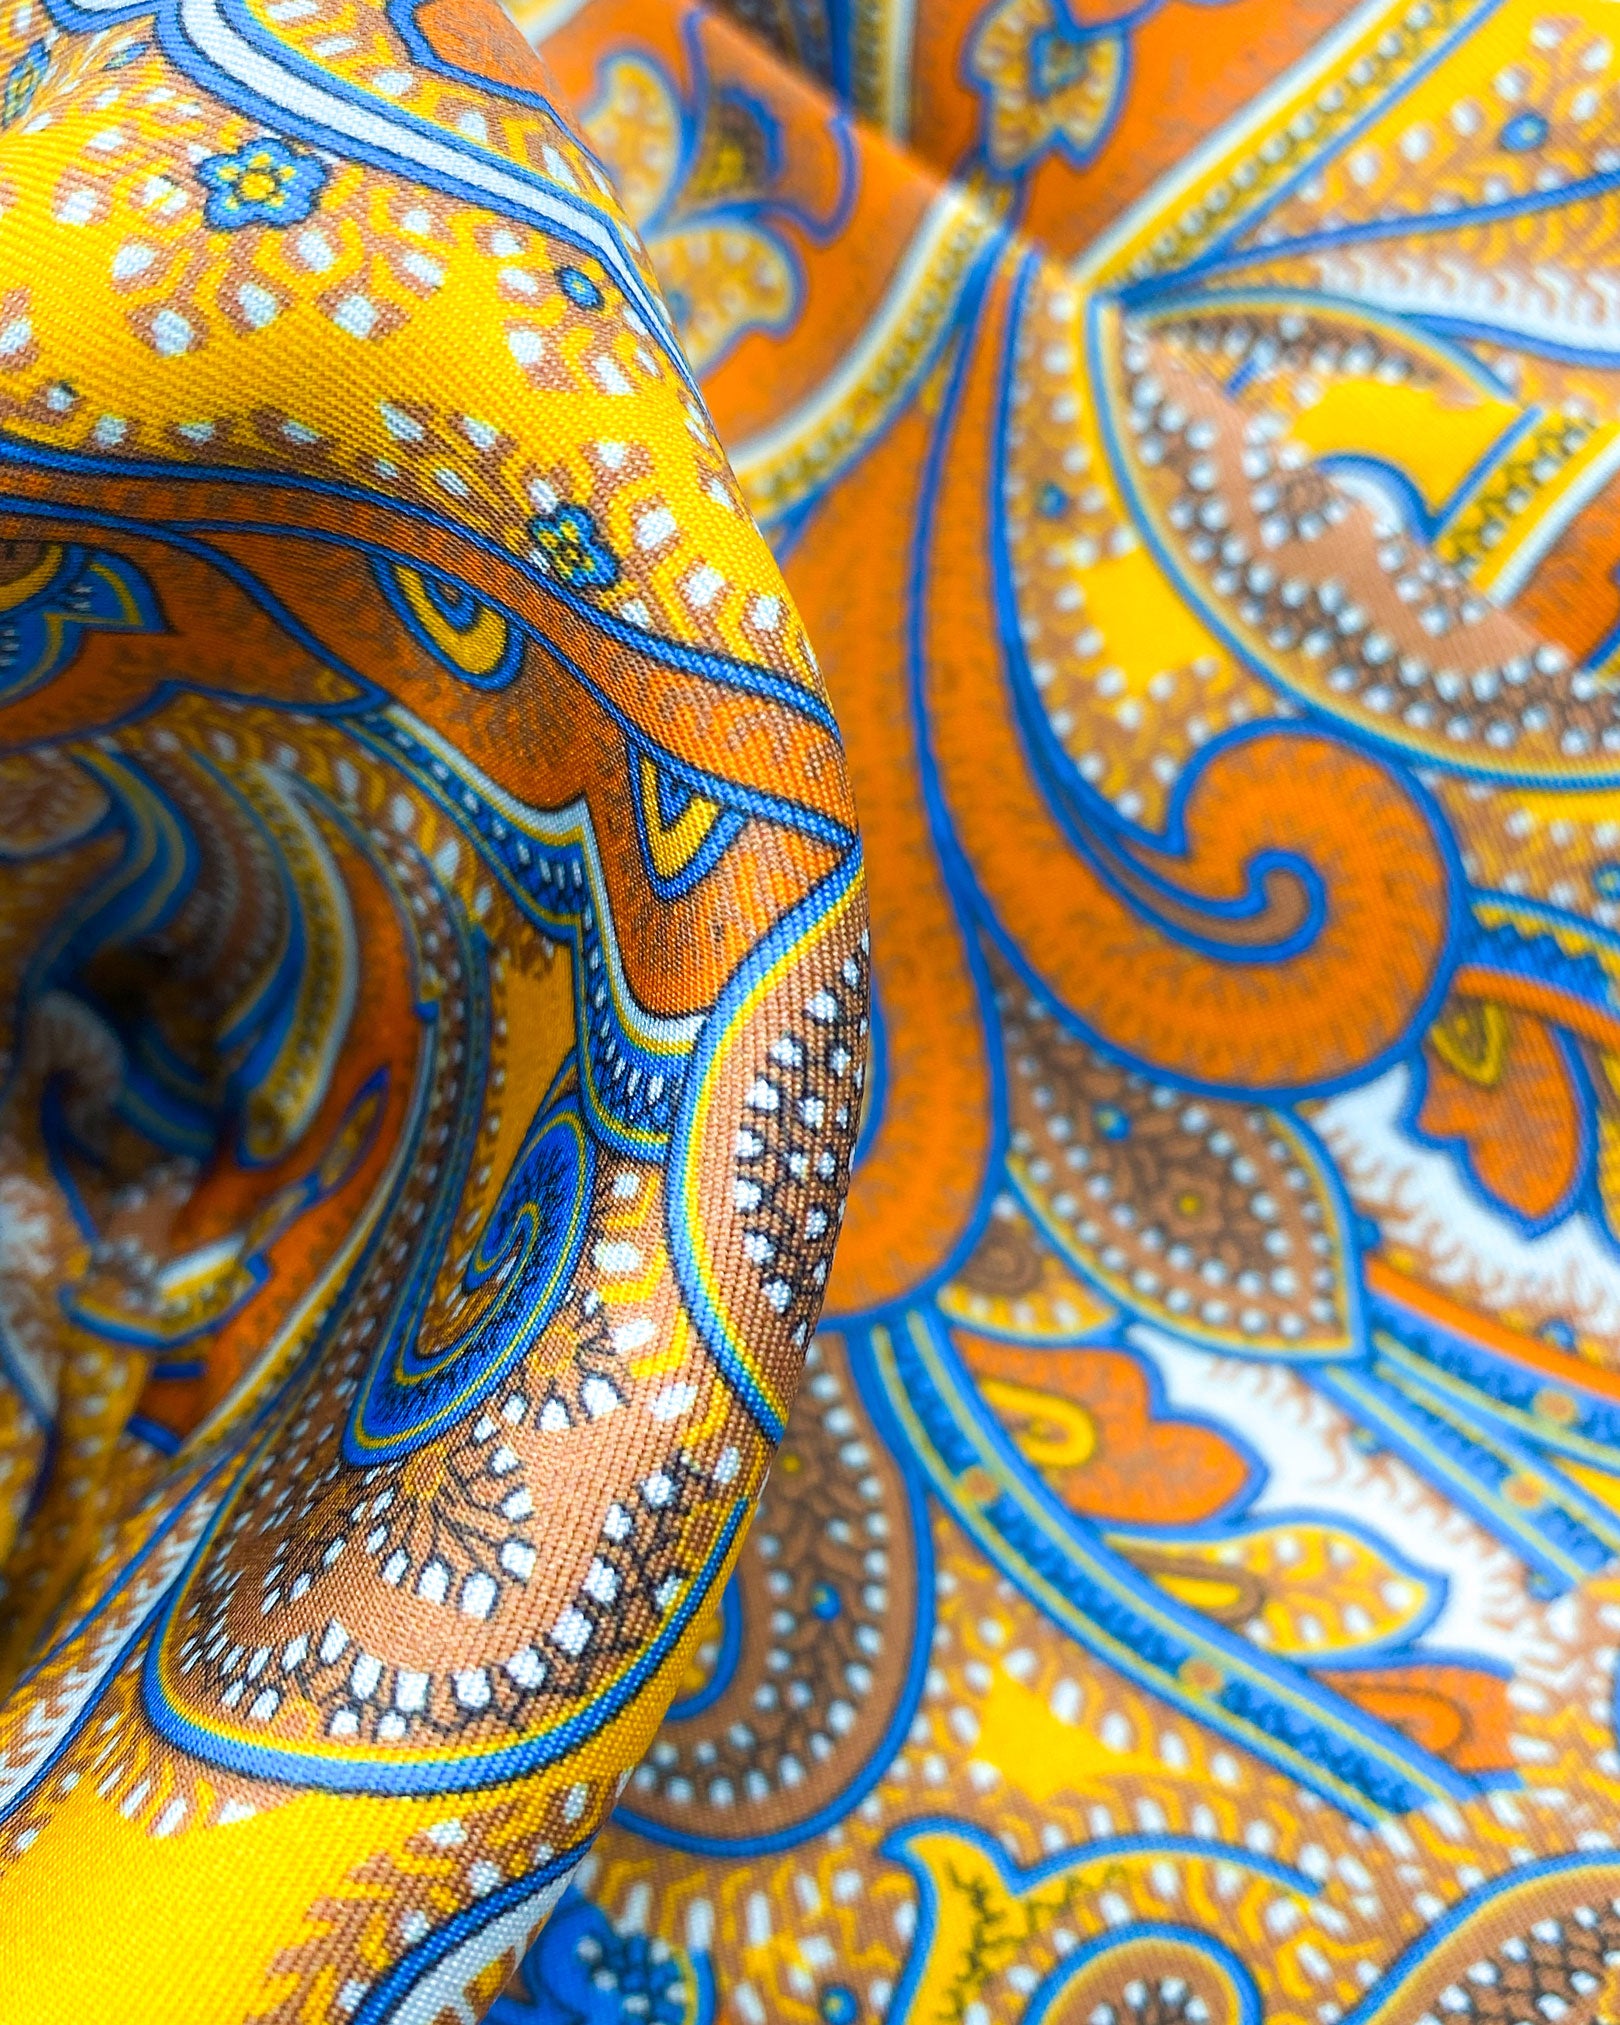 Ruffled close-up view of the 'Carnaby' silk aviator scarf, presenting a closer view of the swirls of warm paisley tones against a bright golden ground and lustre of the silk material.